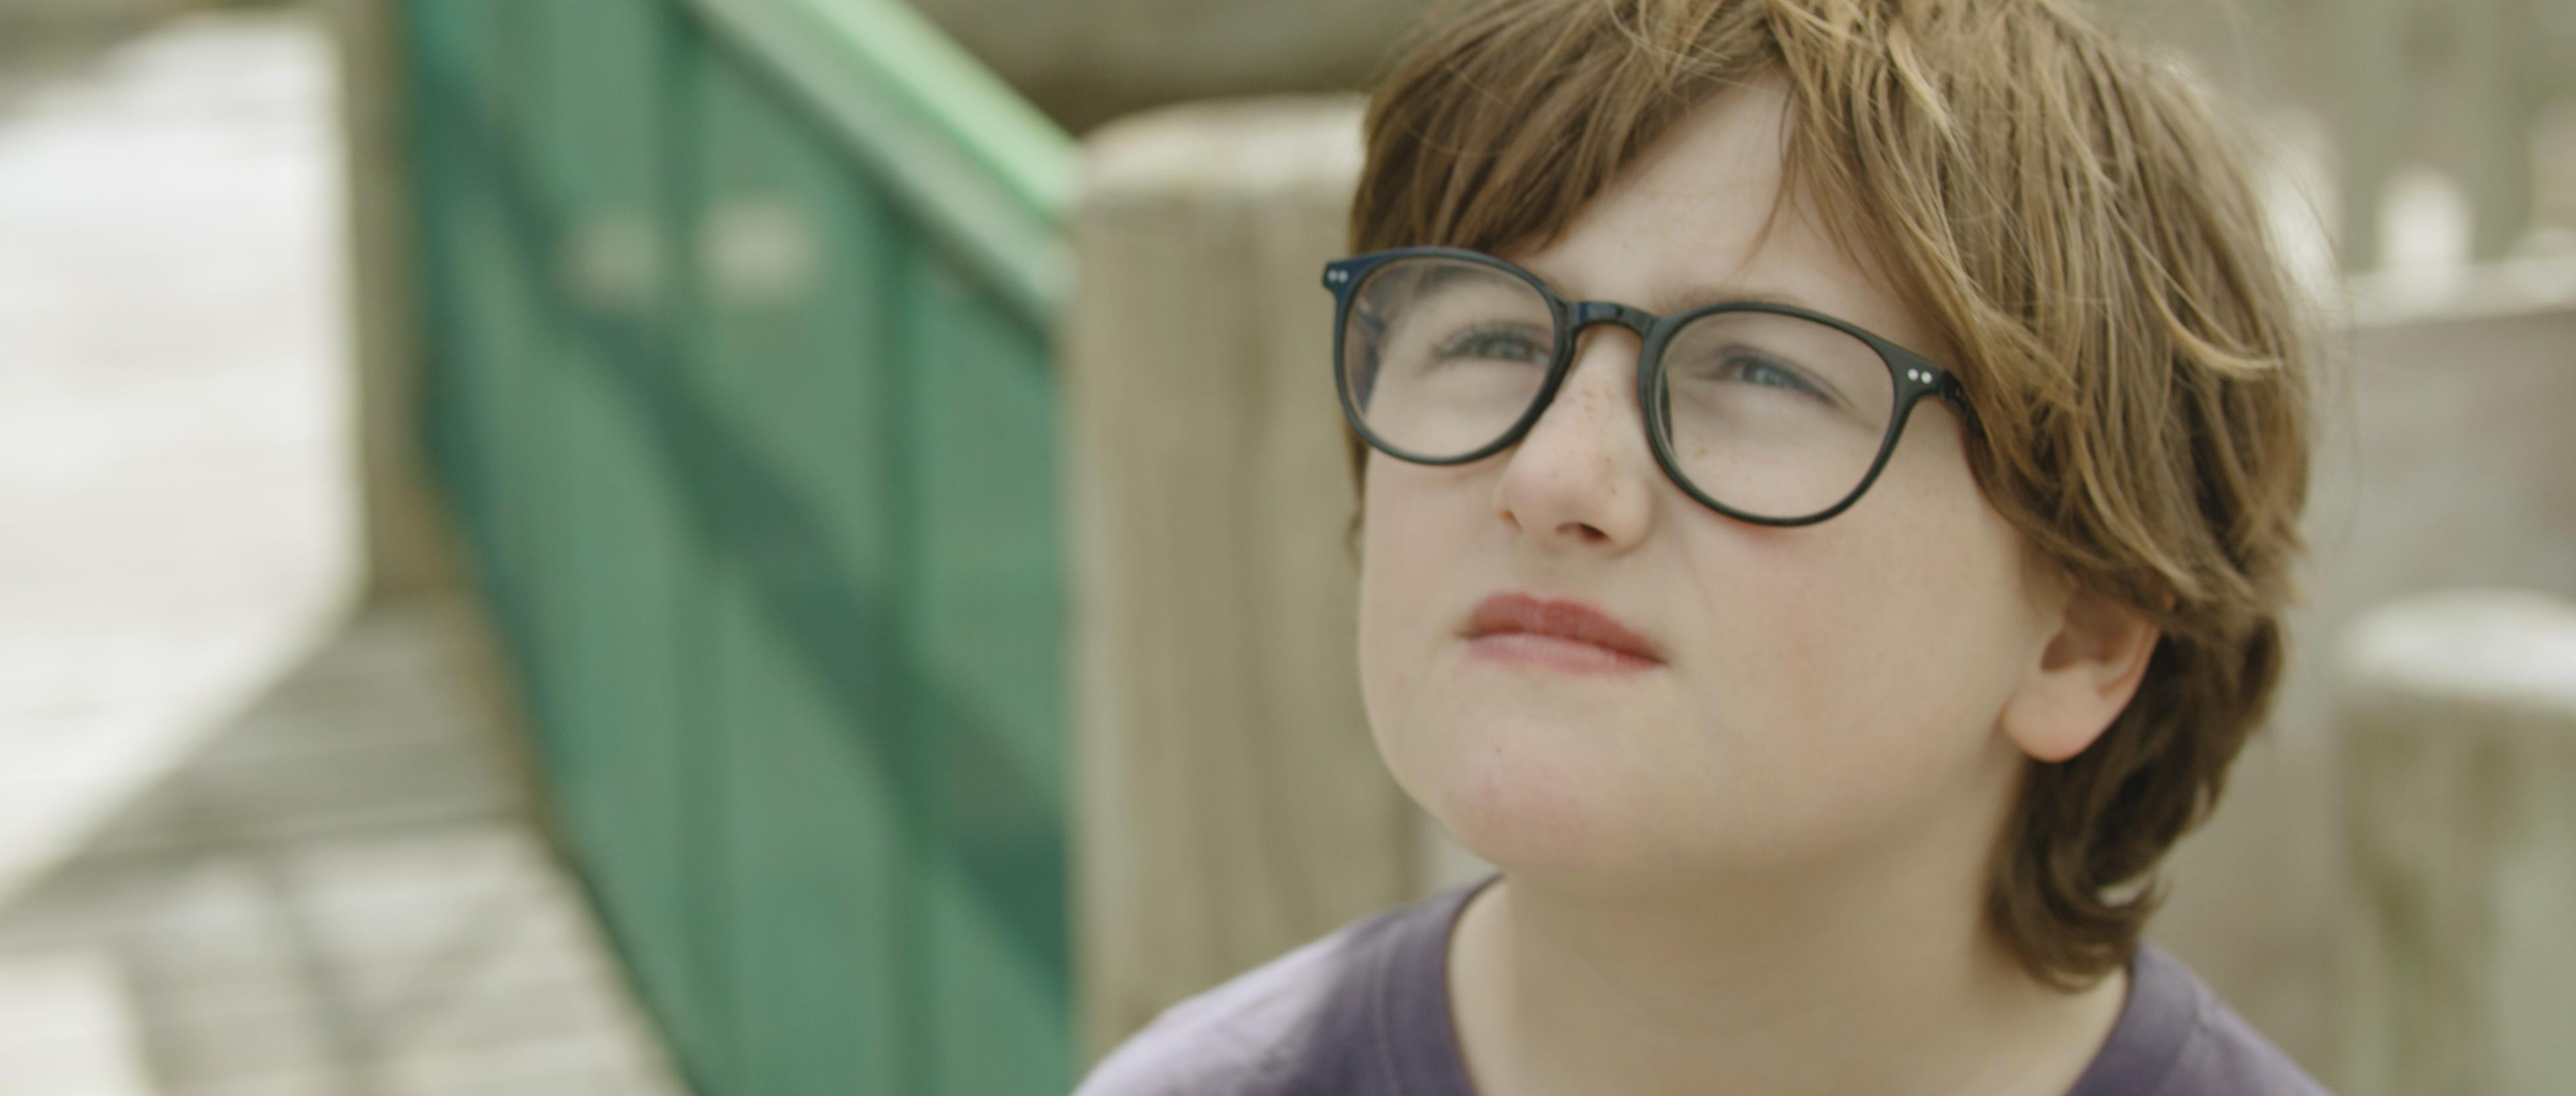 Still from 'Born Different' - a child with light brown short hair, round dark-rimmed glasses and rosy lips looking up towards the sky, on a background of a wooden play structure.